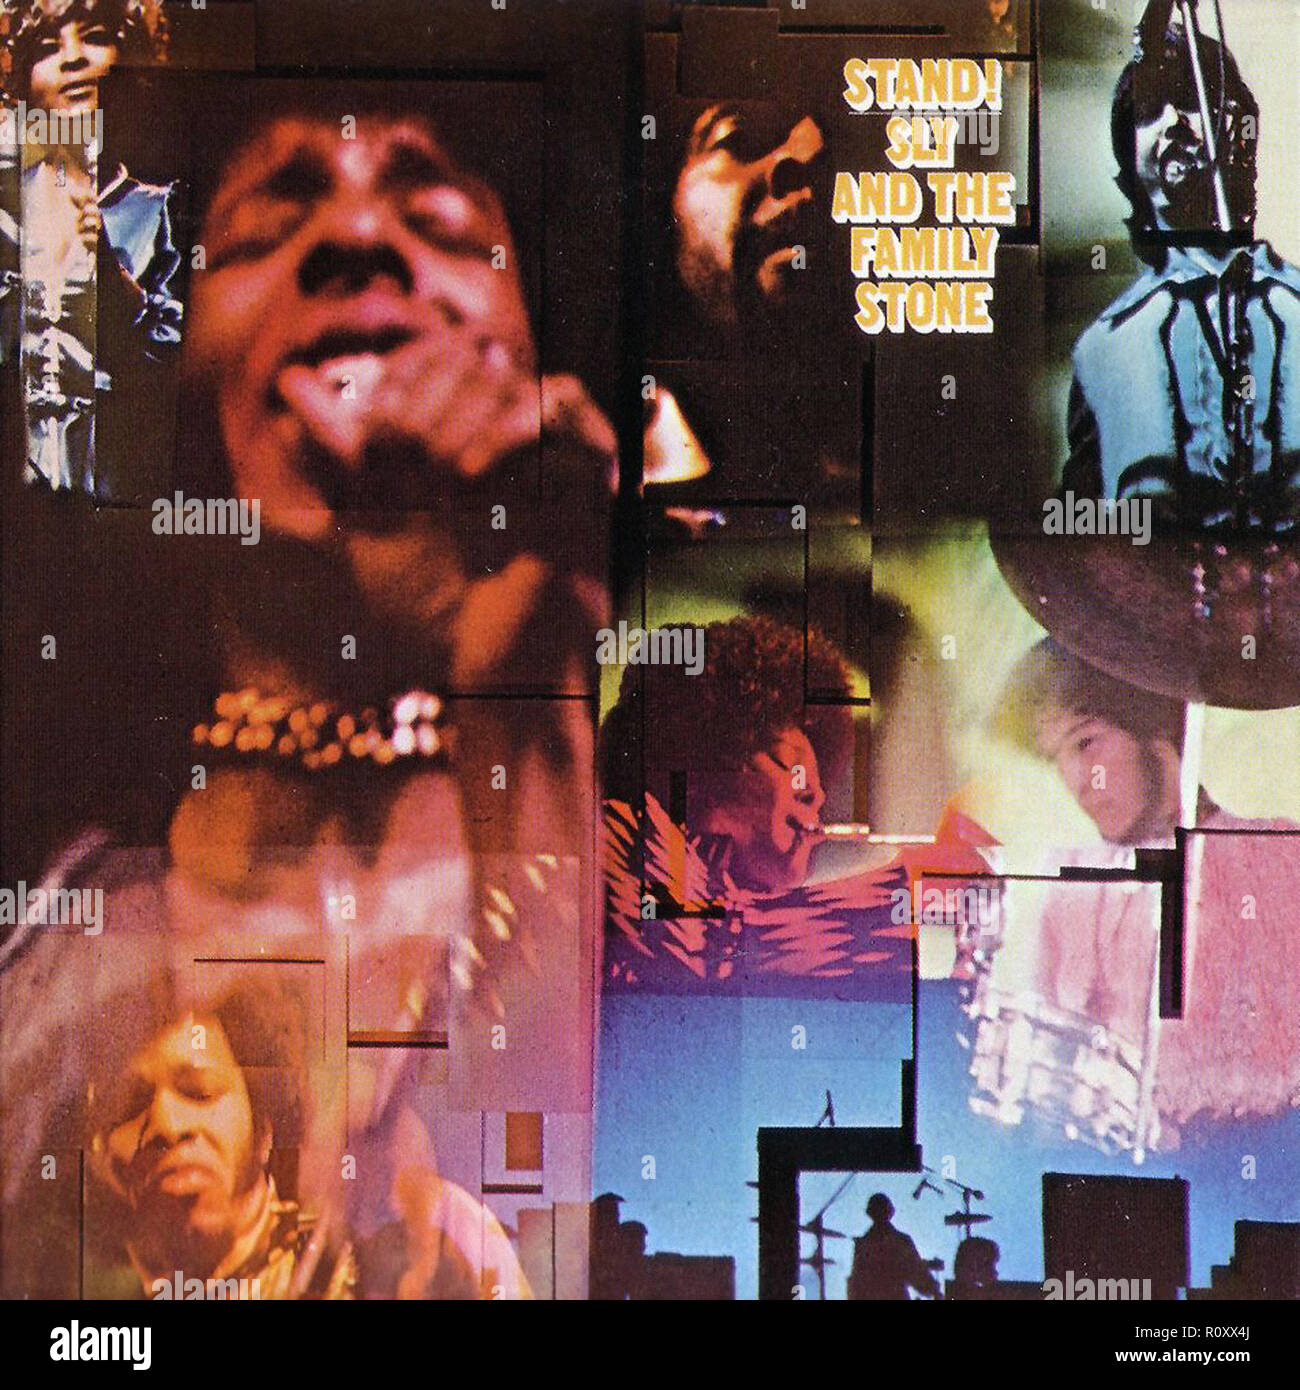 STAND! SLY AND THE FAMILY STONE - Vintage cover album Stock Photo